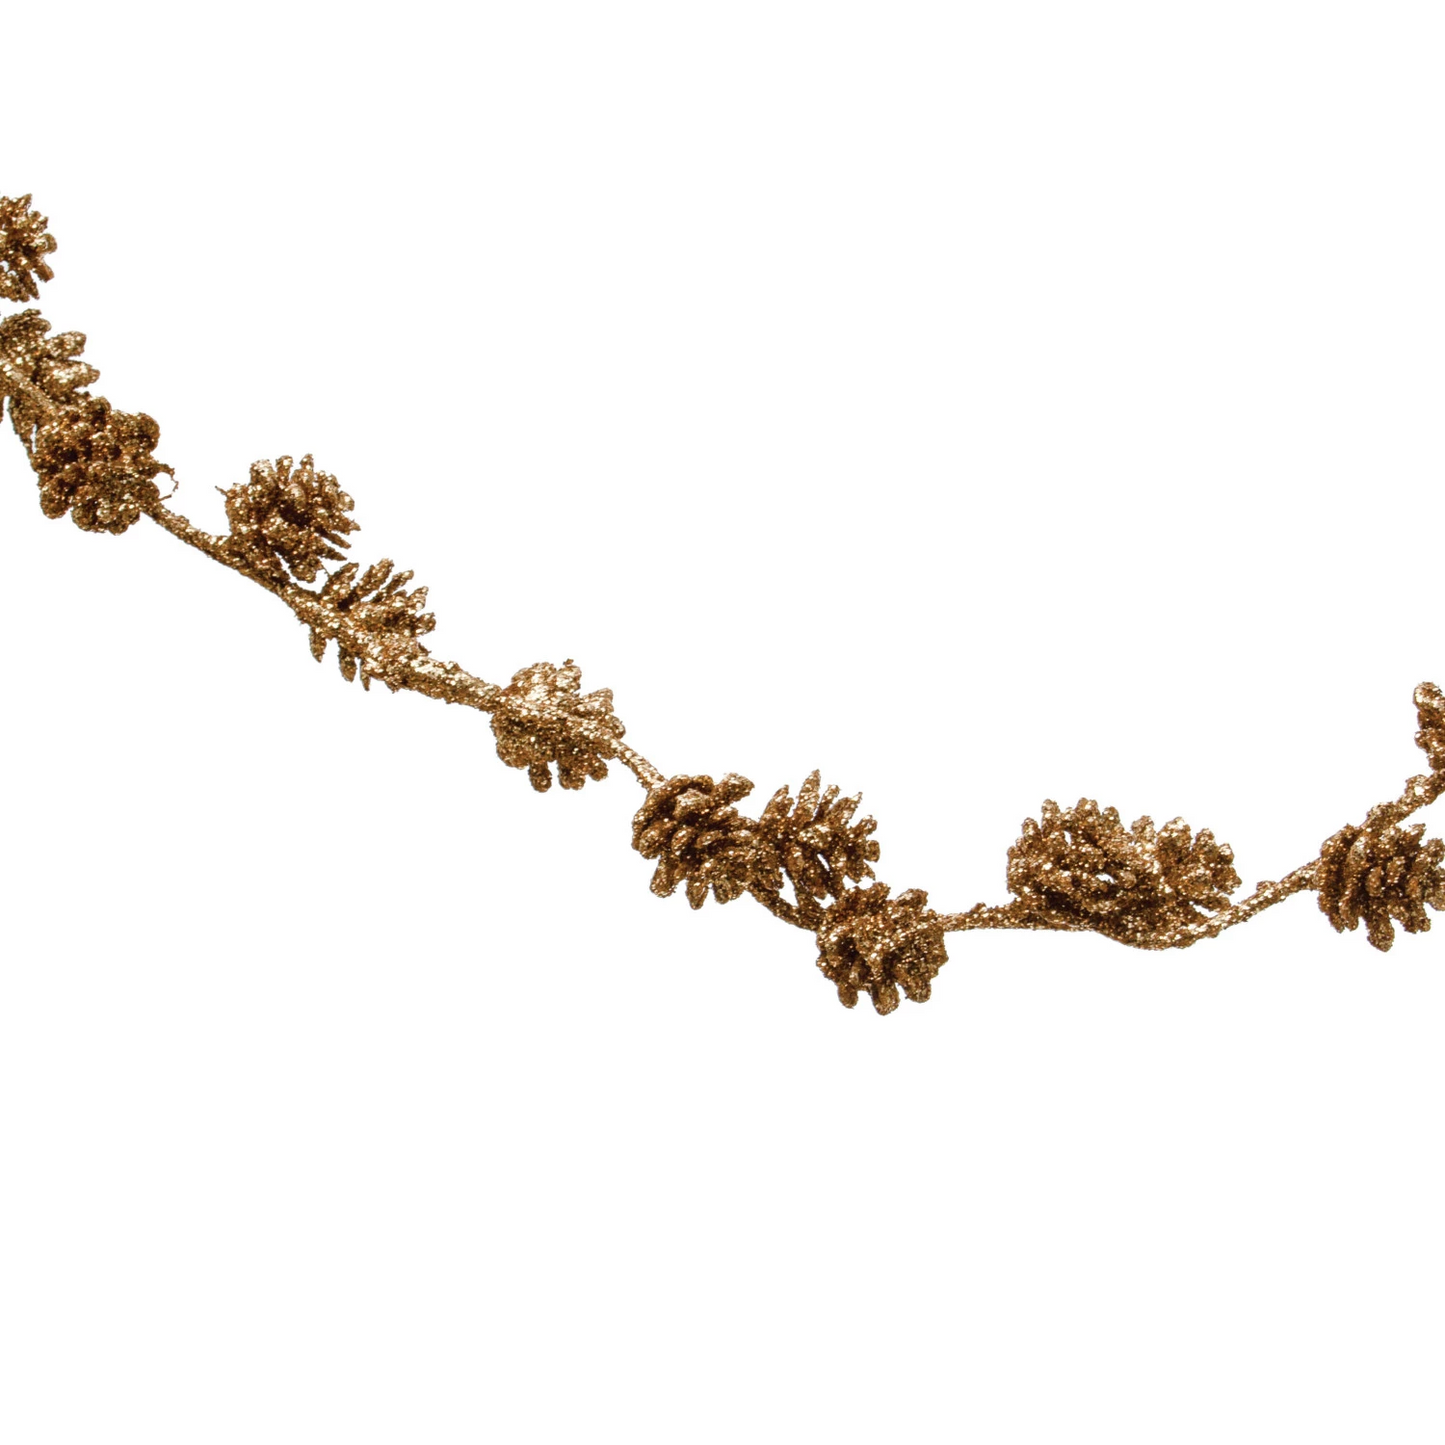 Pinecone Garland with Gold Glitter - 72"